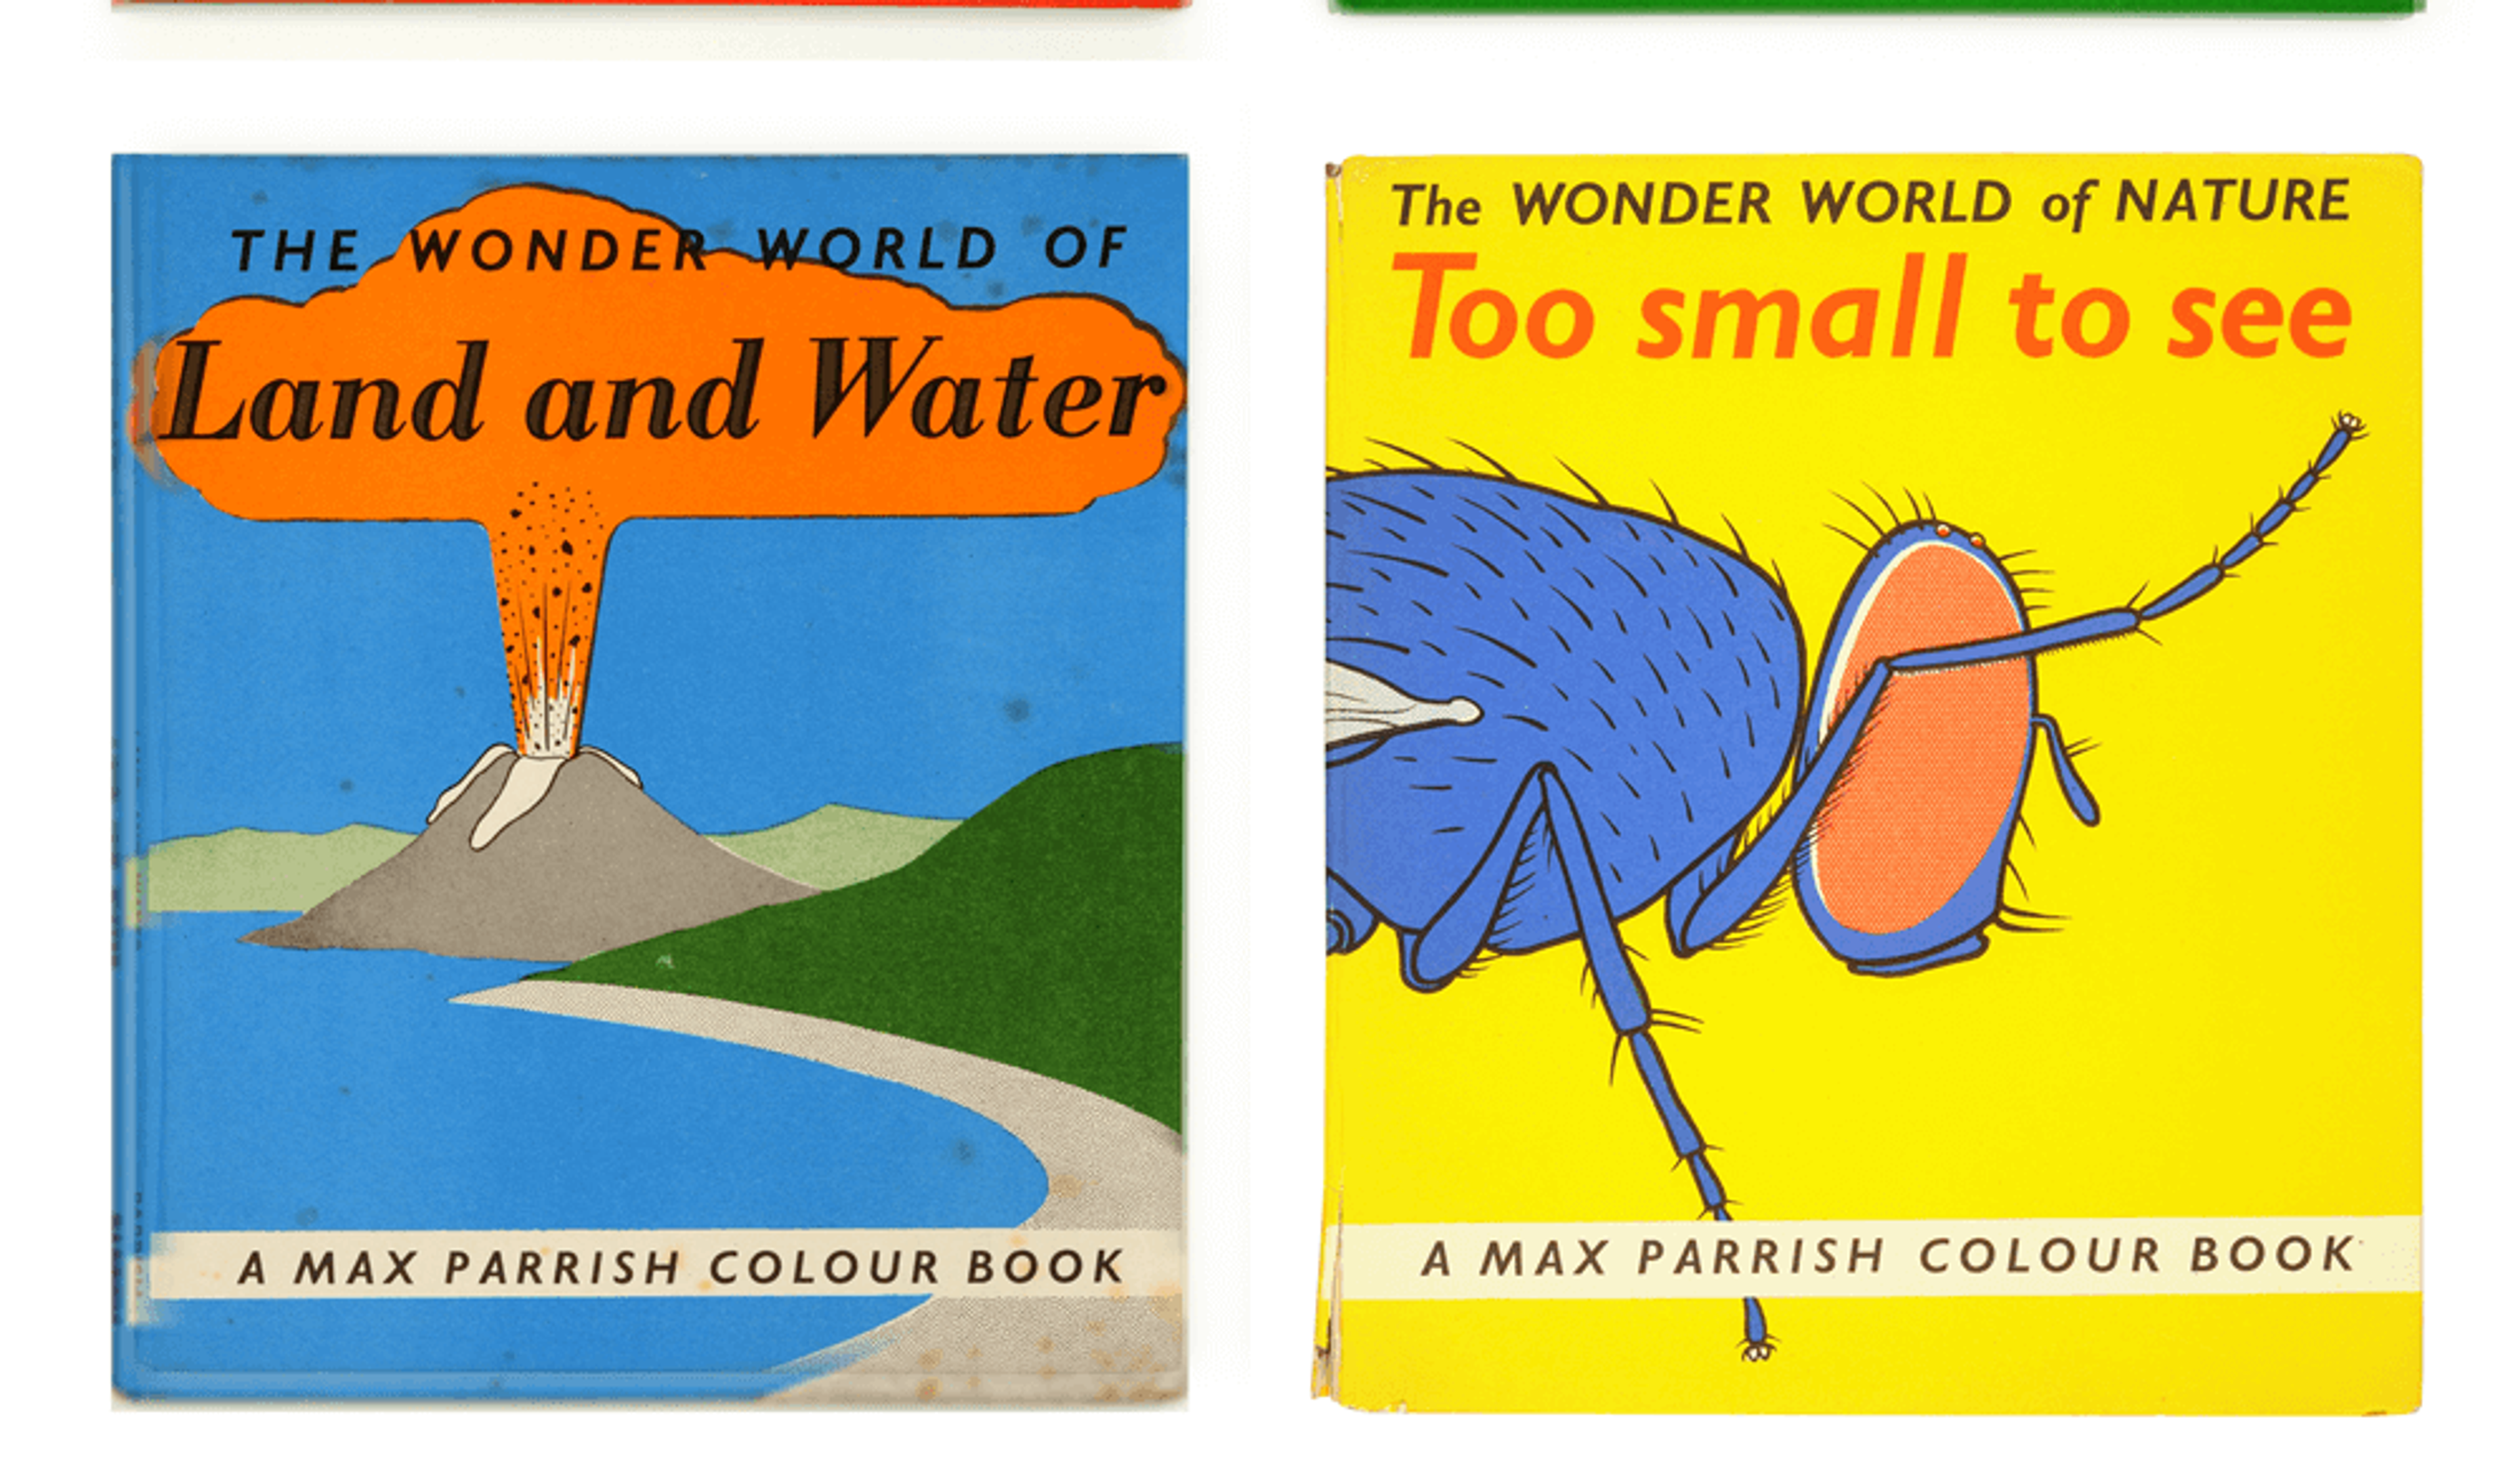 "The Wonder World of Land and Water" and "The Wonder World of Nature: Too small to see" book covers 